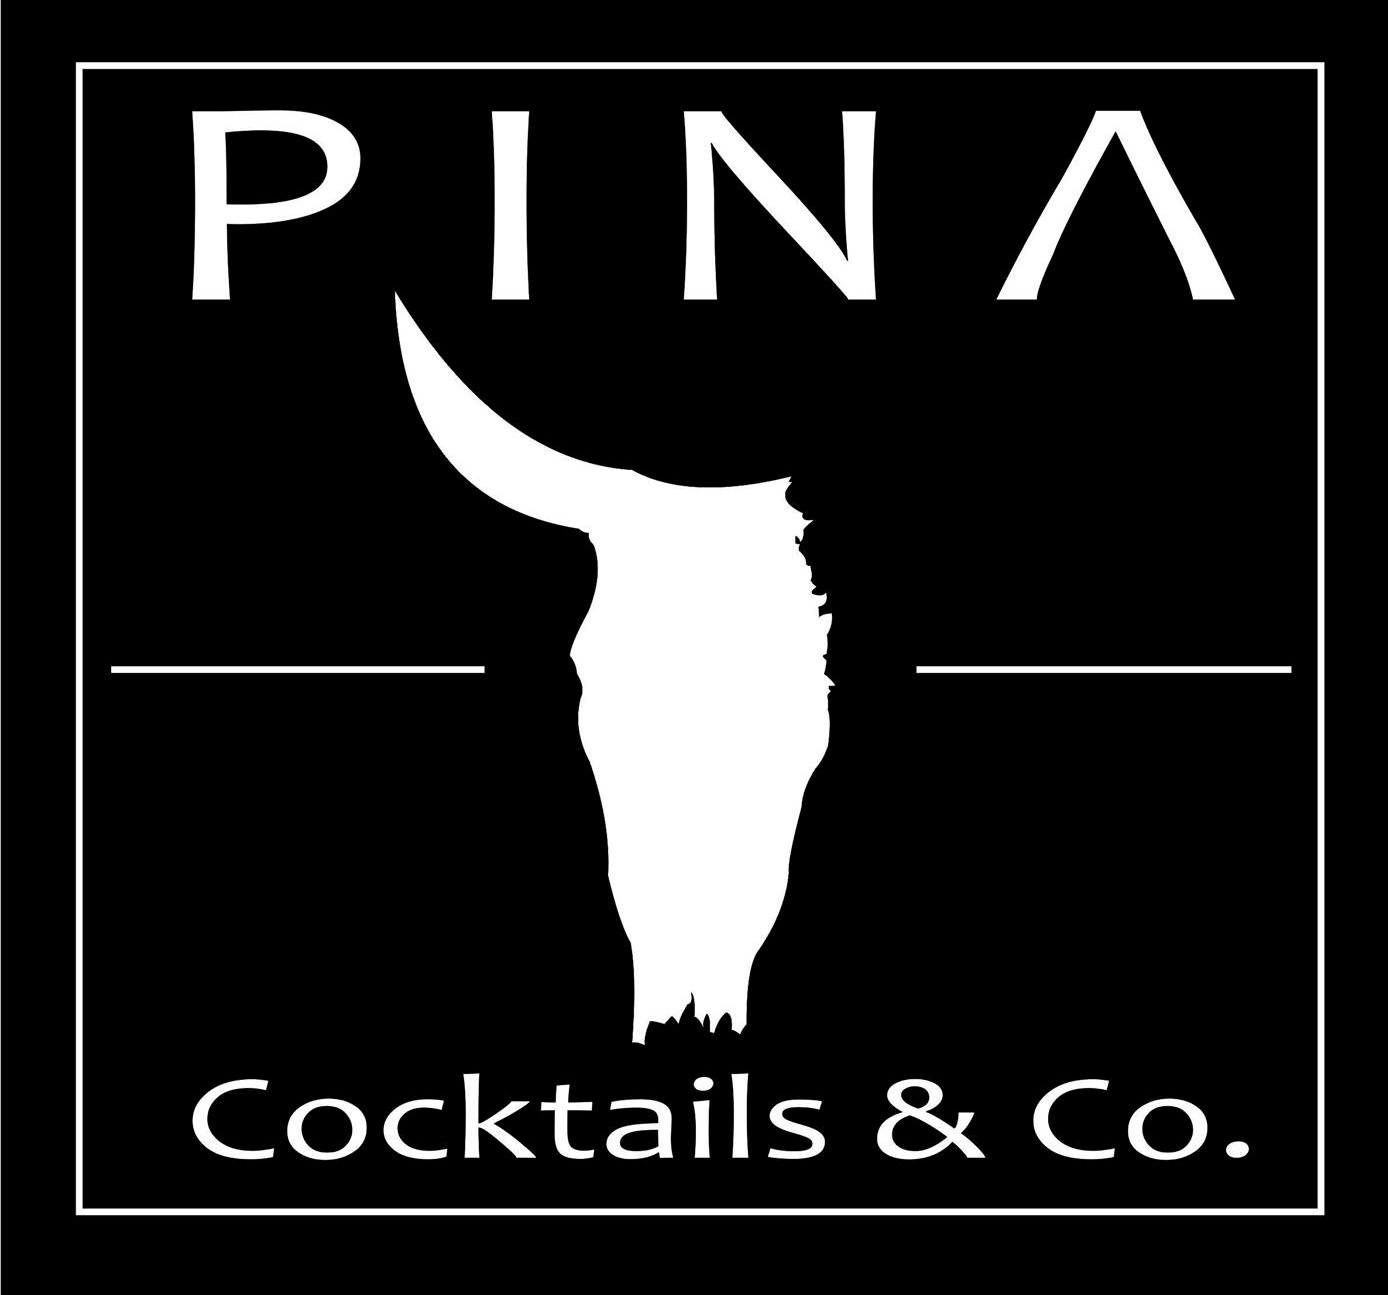 Pina Cocktails & Co.